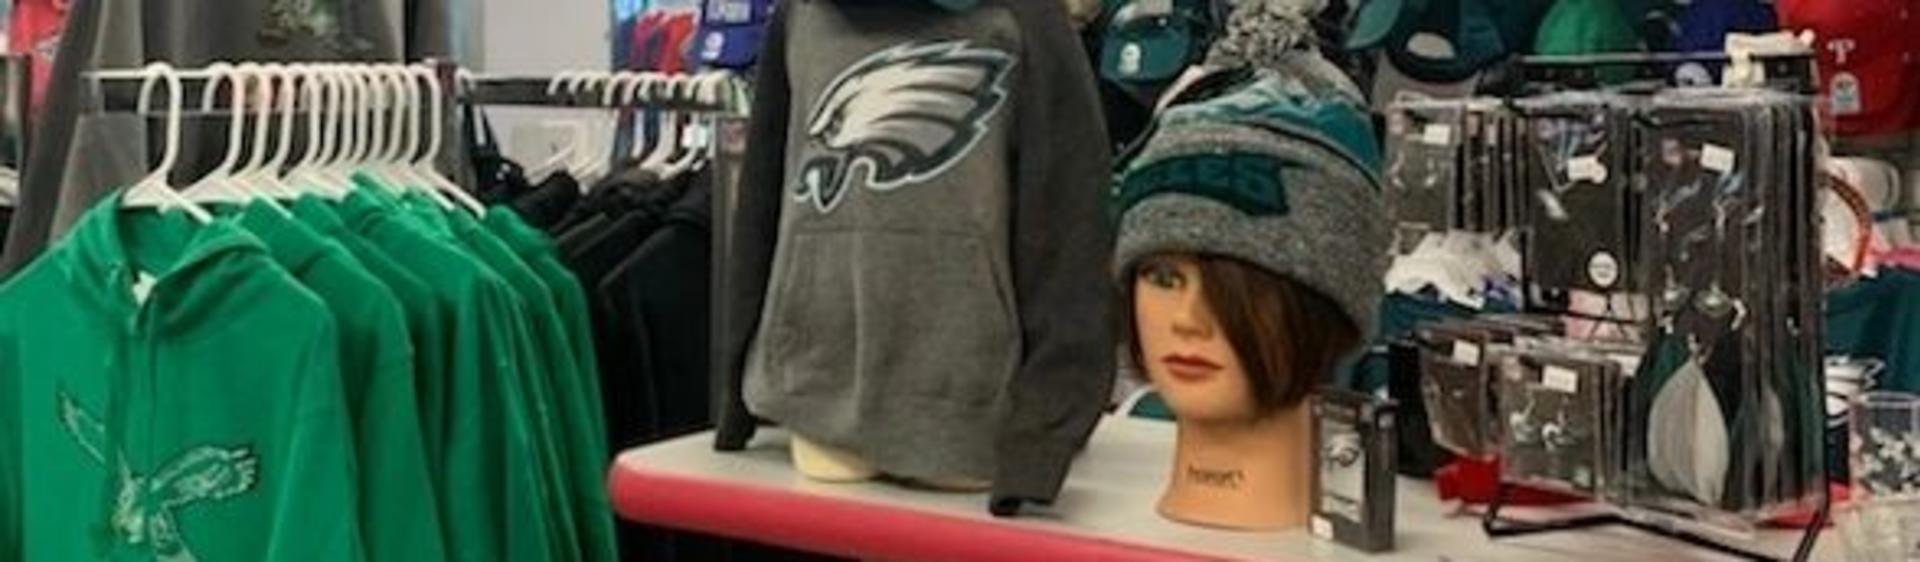 Eagles fan gear flying off the shelves at Montgomery County stores